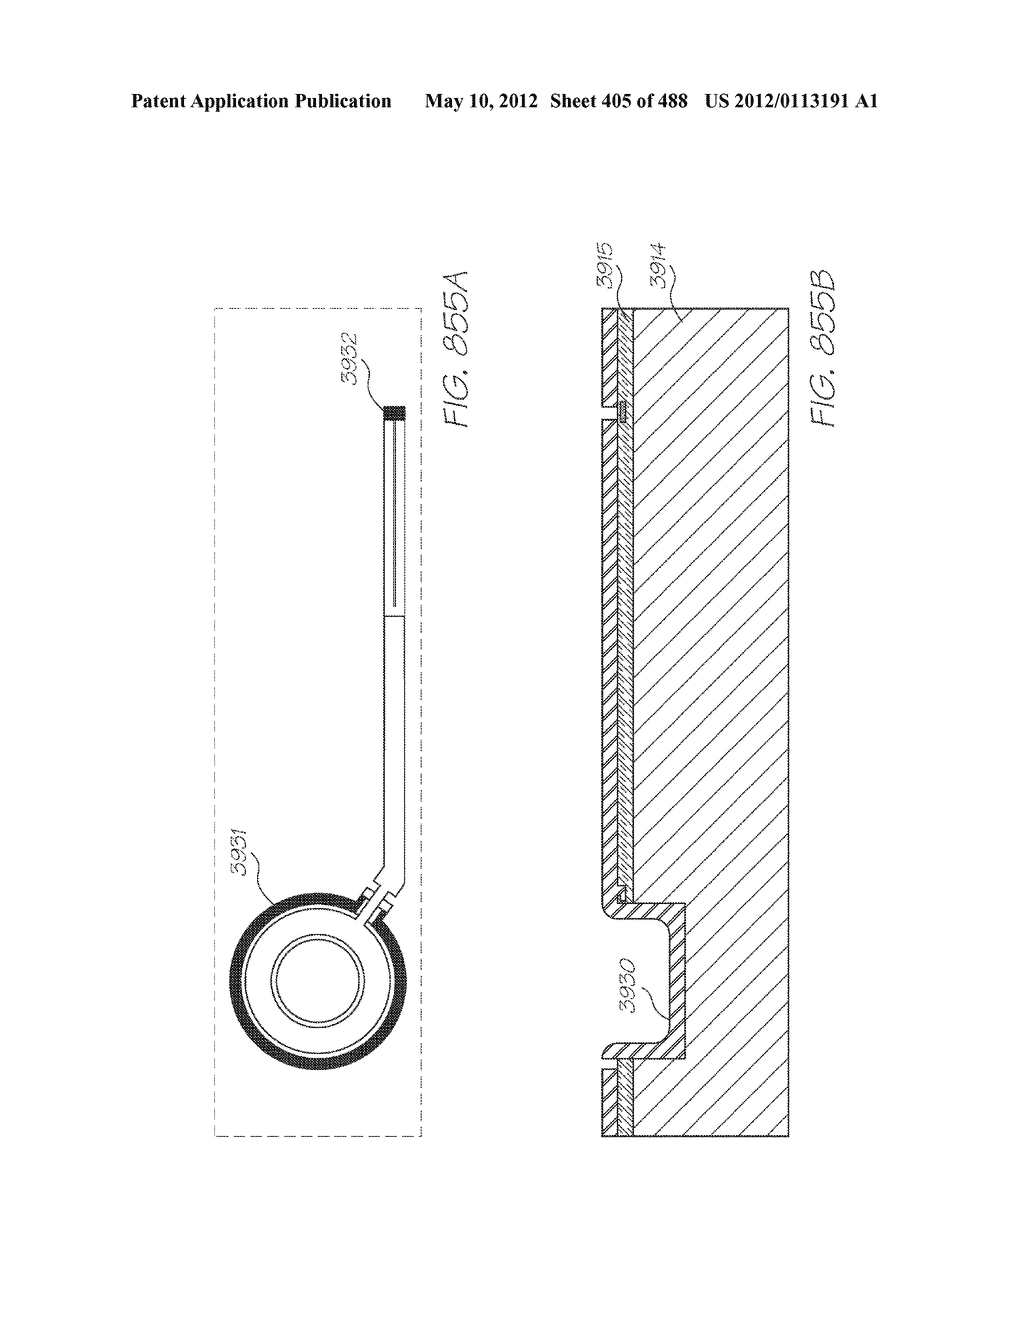 PRINTHEAD INTEGRATED CIRCUIT WITH A SOLENOID PISTON - diagram, schematic, and image 406